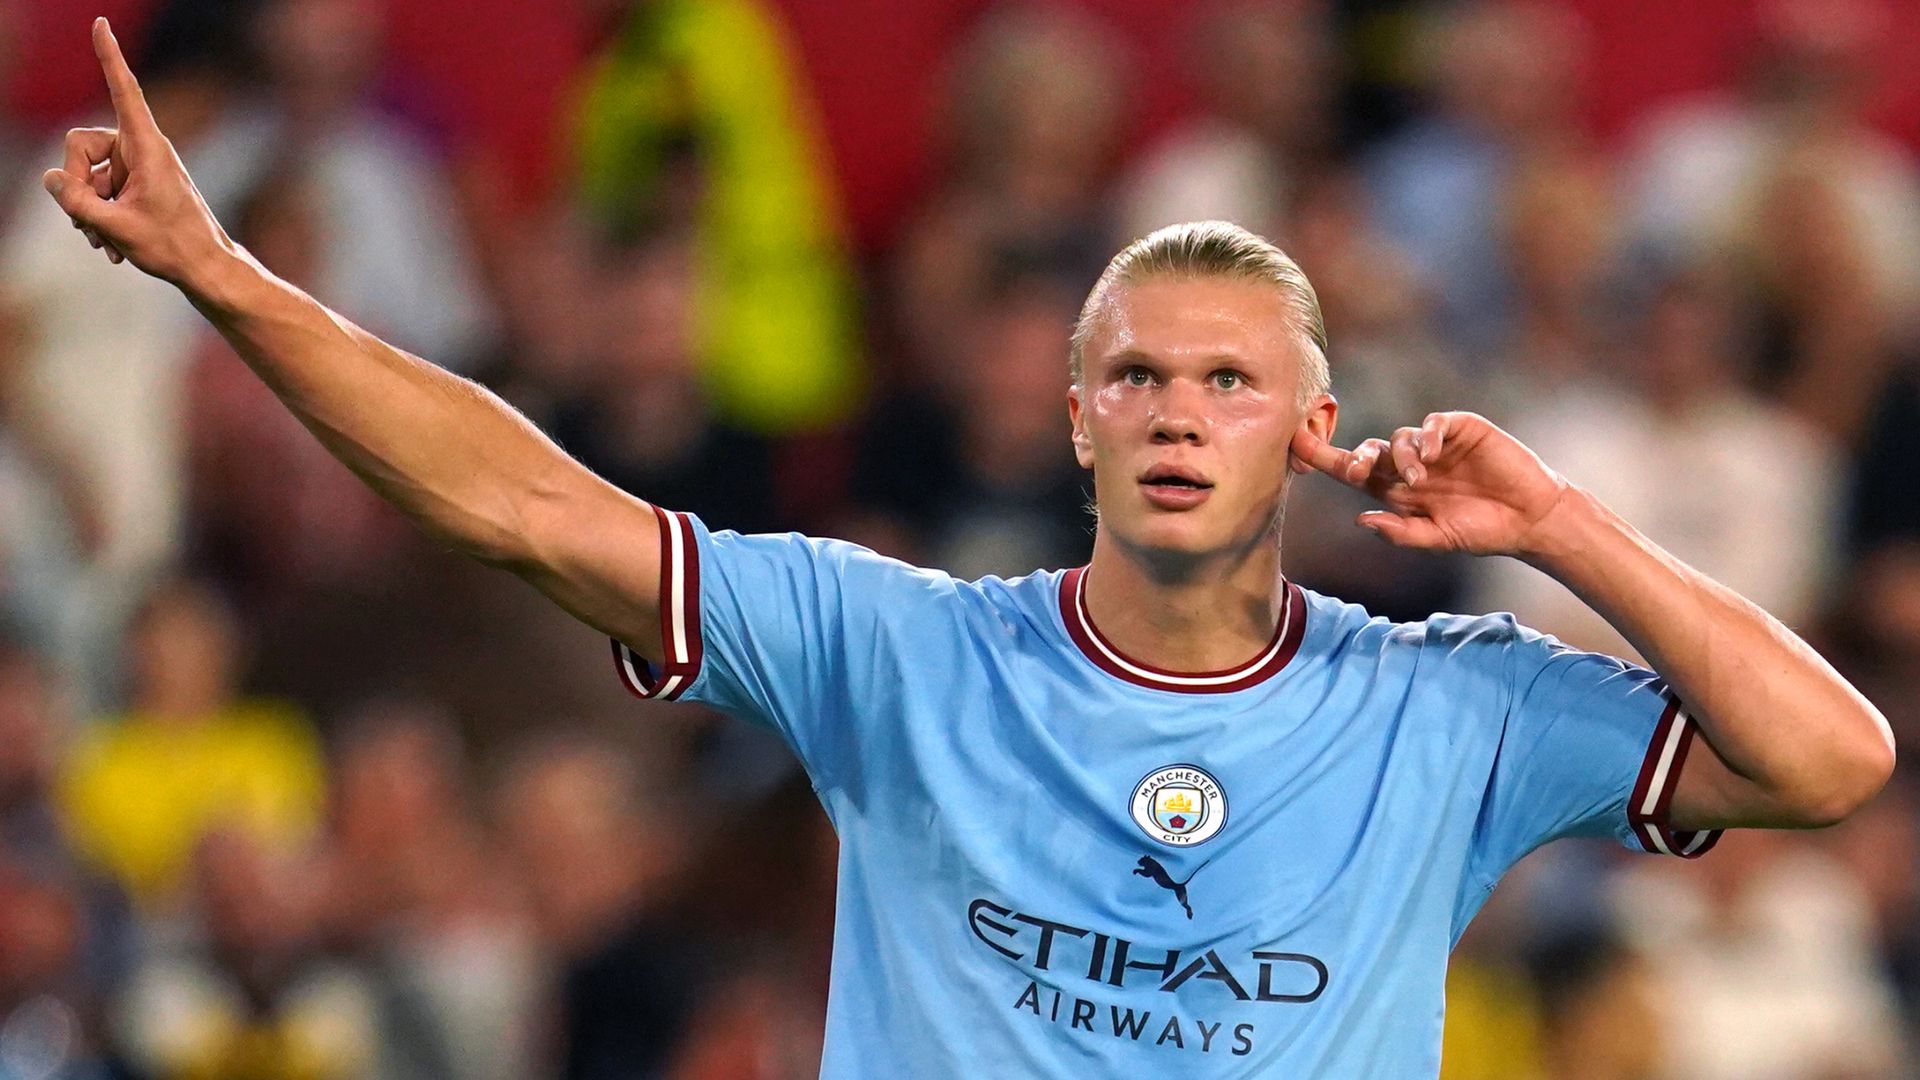 Sevilla 0-4 Manchester City: Erling Haaland hits double as Pep Guardiola’s side make perfect start to Champions League campaign